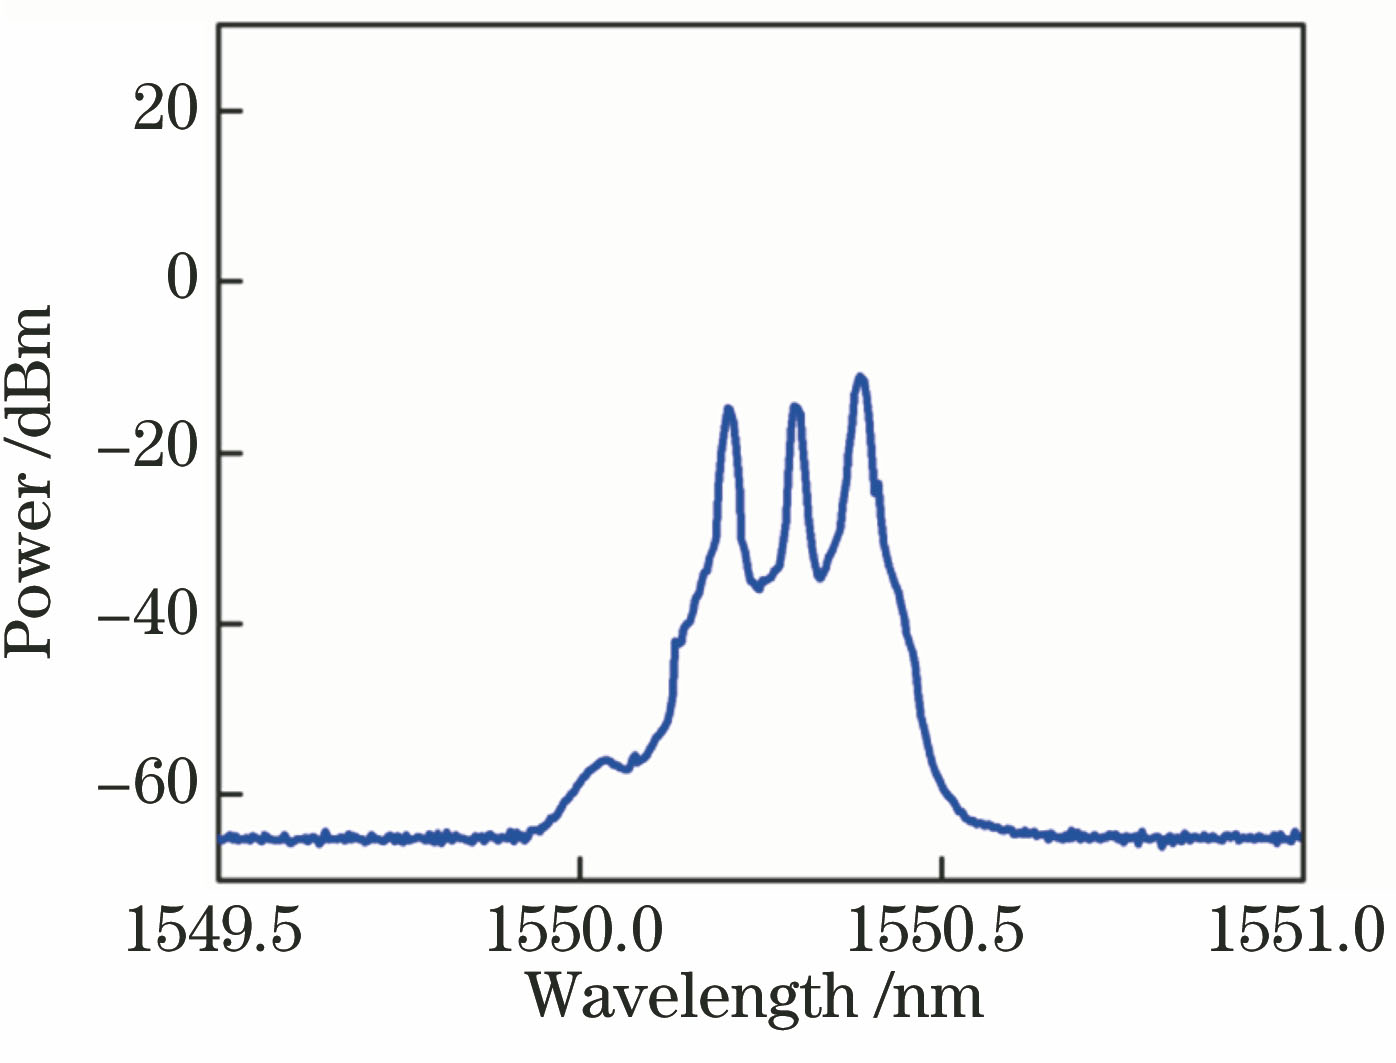 Laser output spectral lines without injection locking